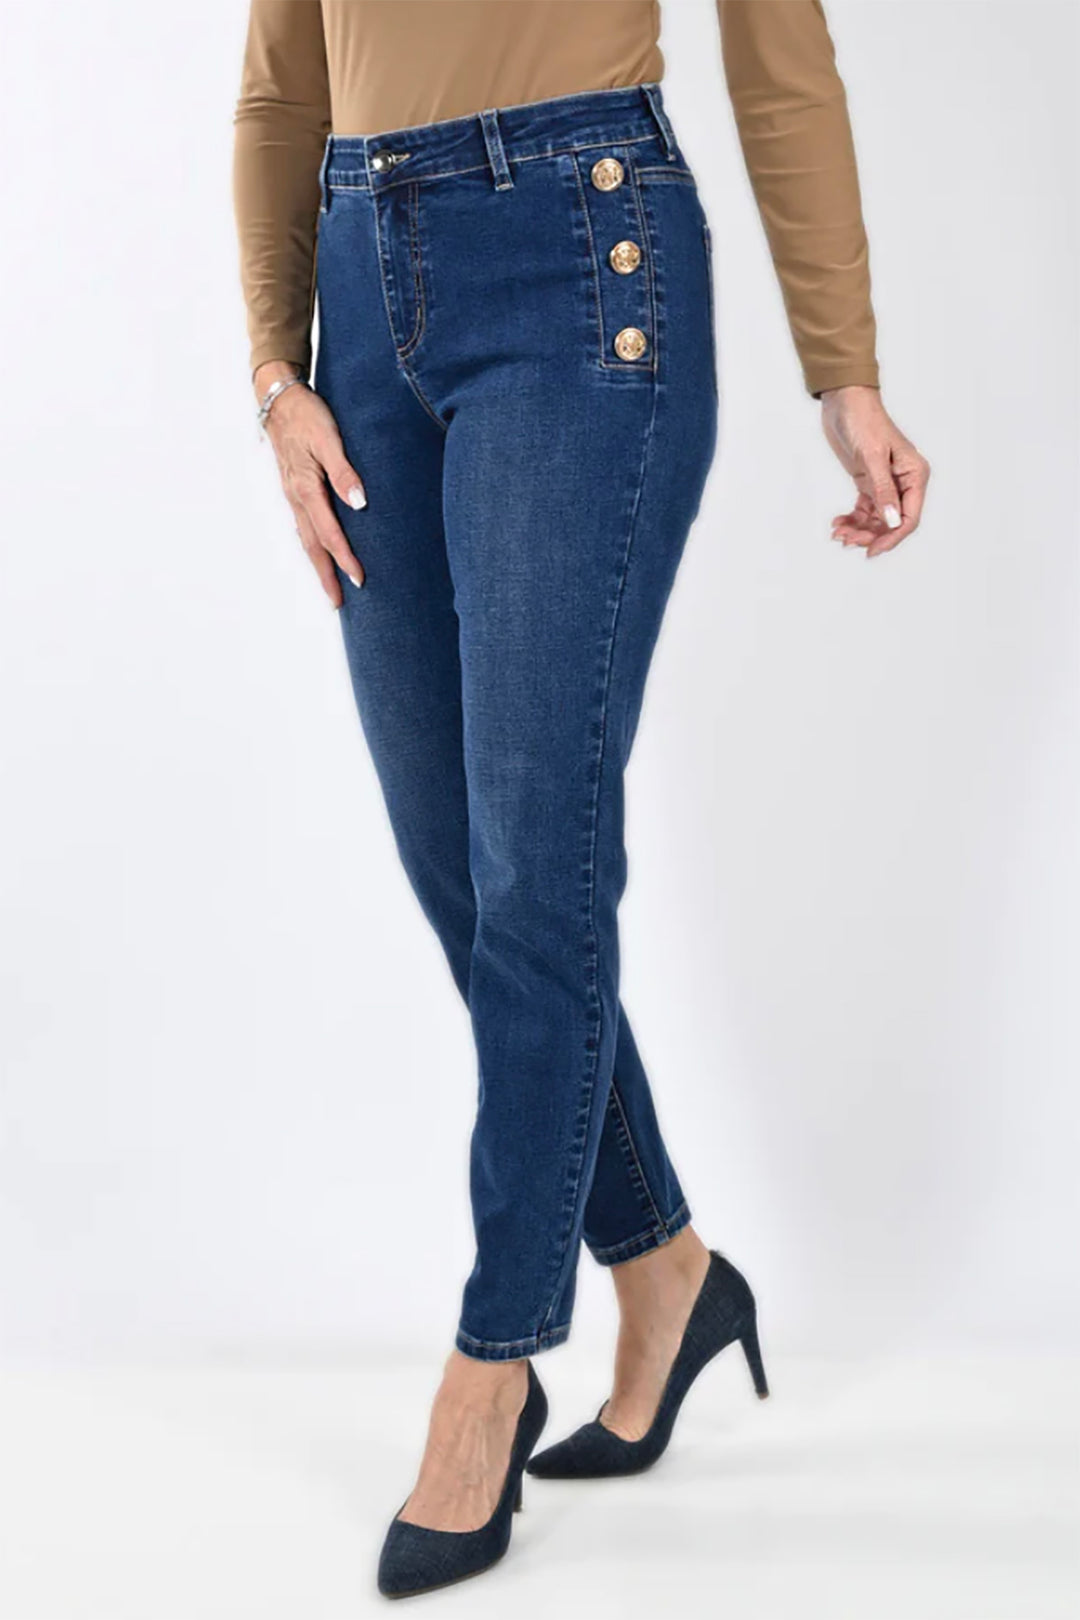 Woman wearing the bronze button jeans by Frank Lyman, sold and shipped from Pizazz Boutique